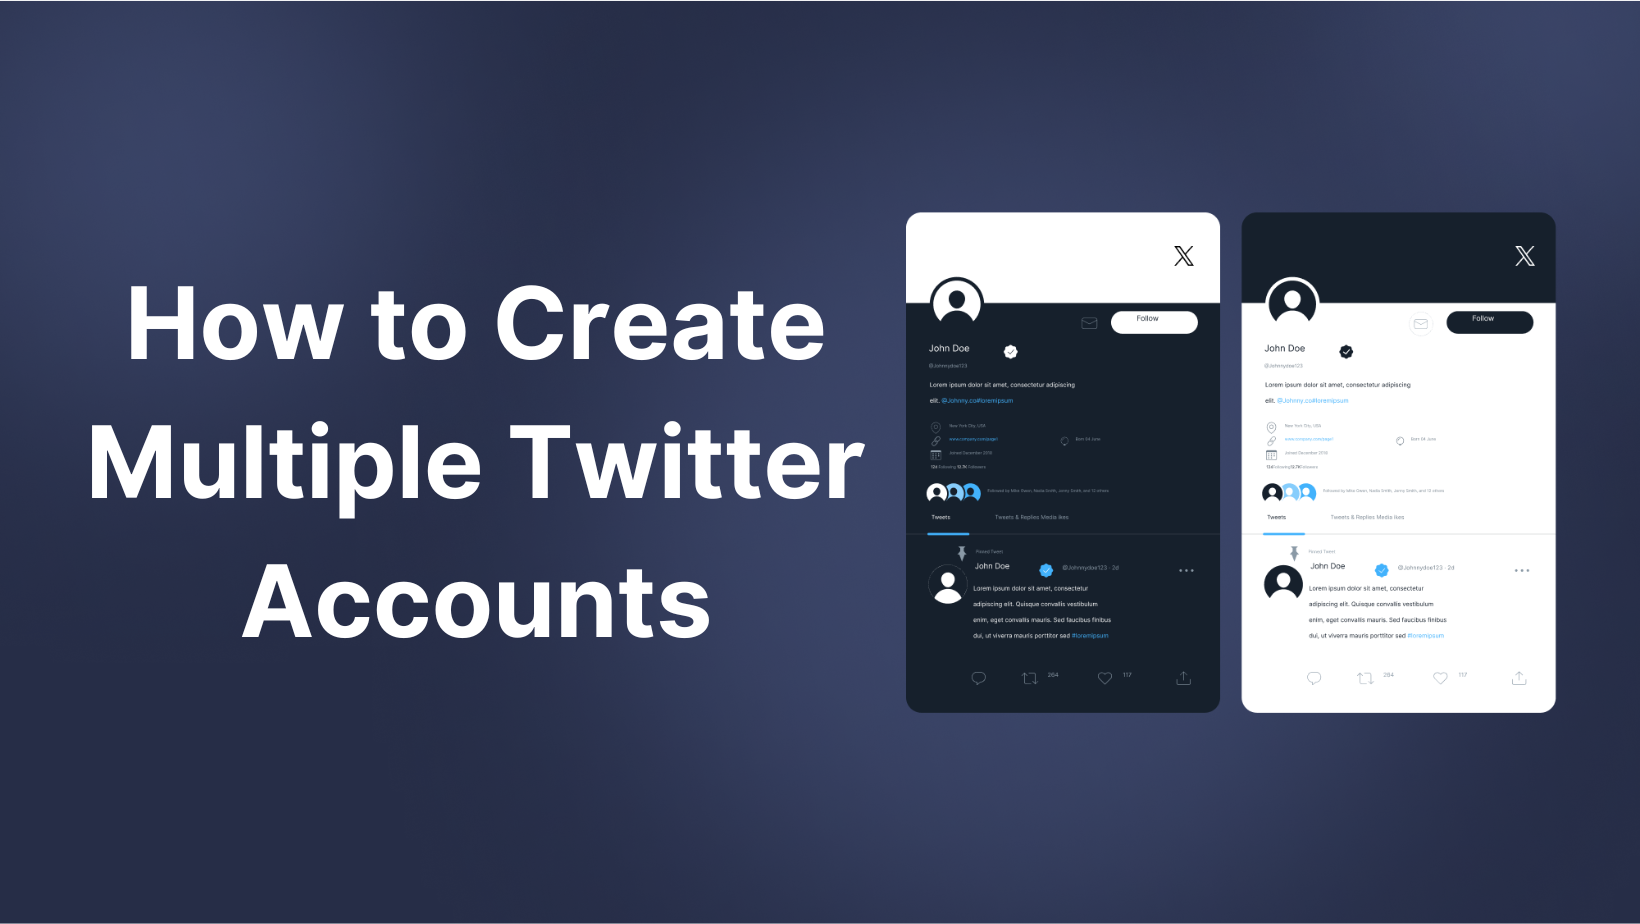 Register and Manage Multiple Accounts on Twitter